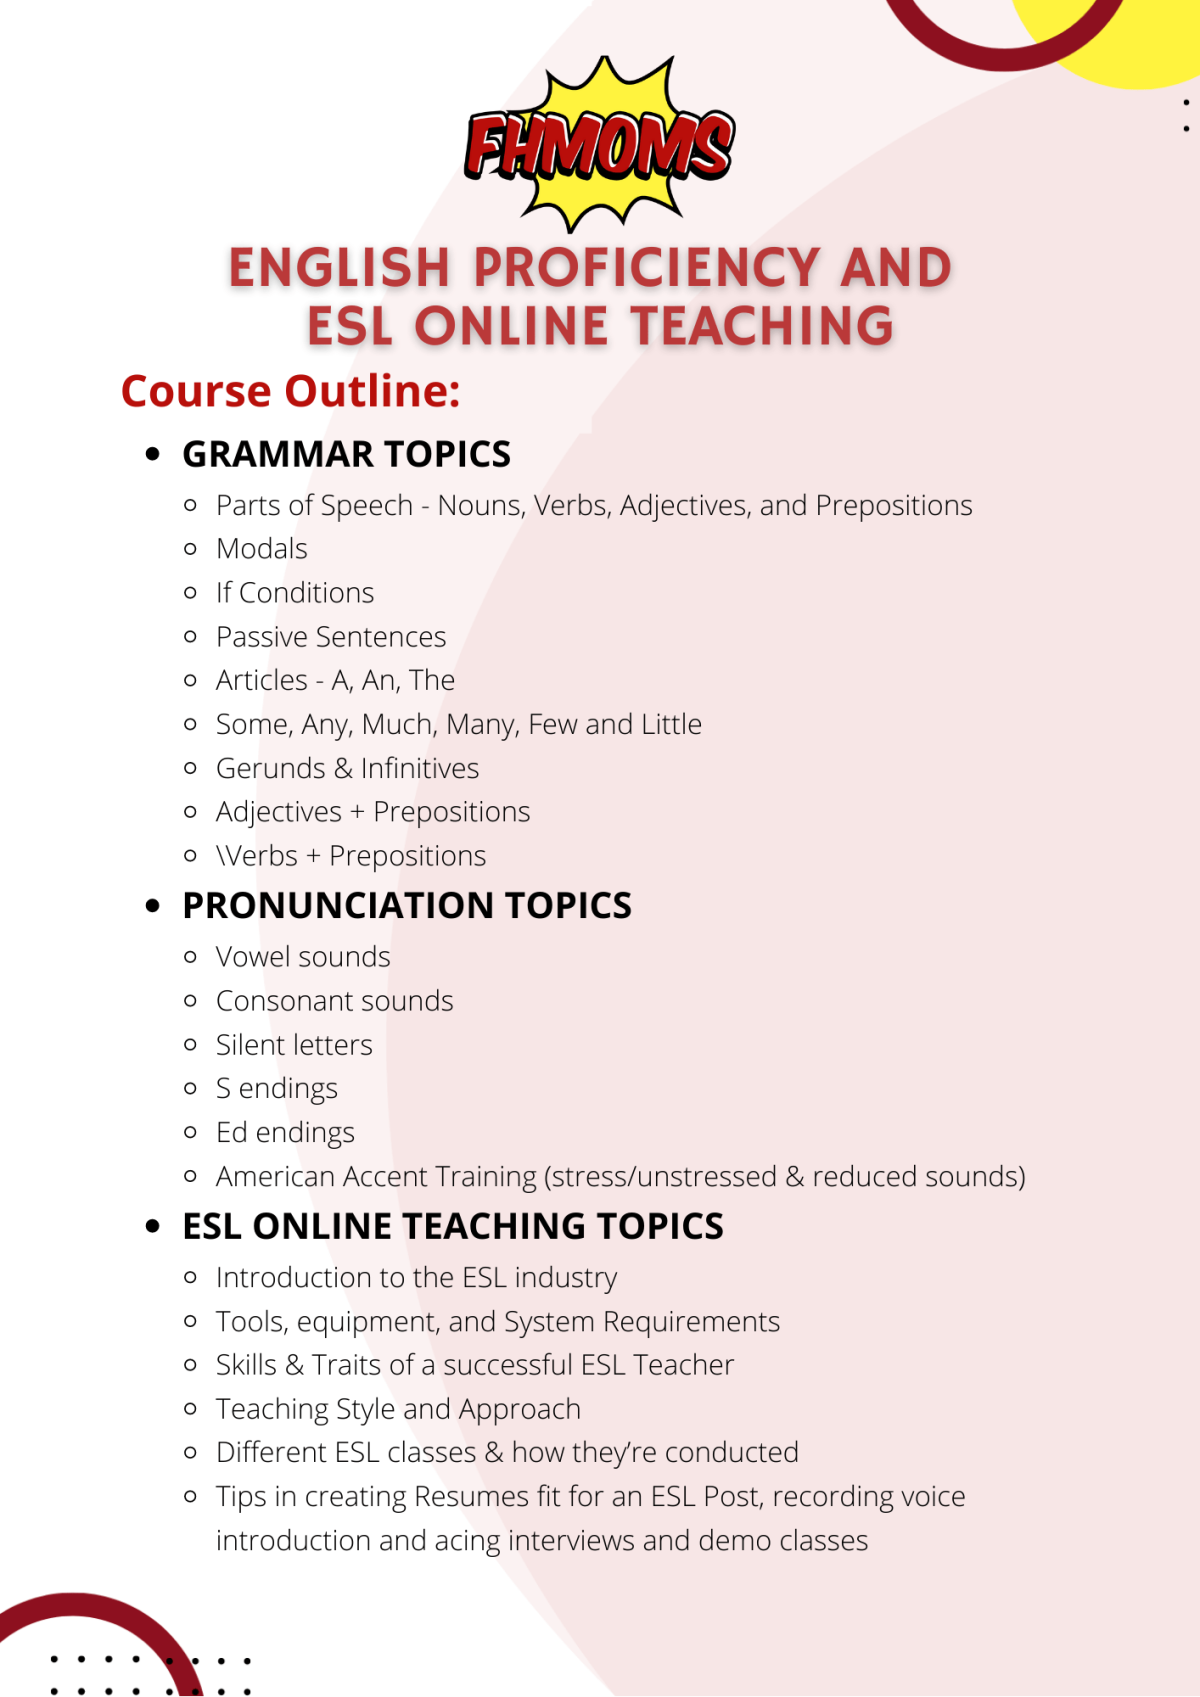 English Proficiency and ESL Online Teaching Course Outline